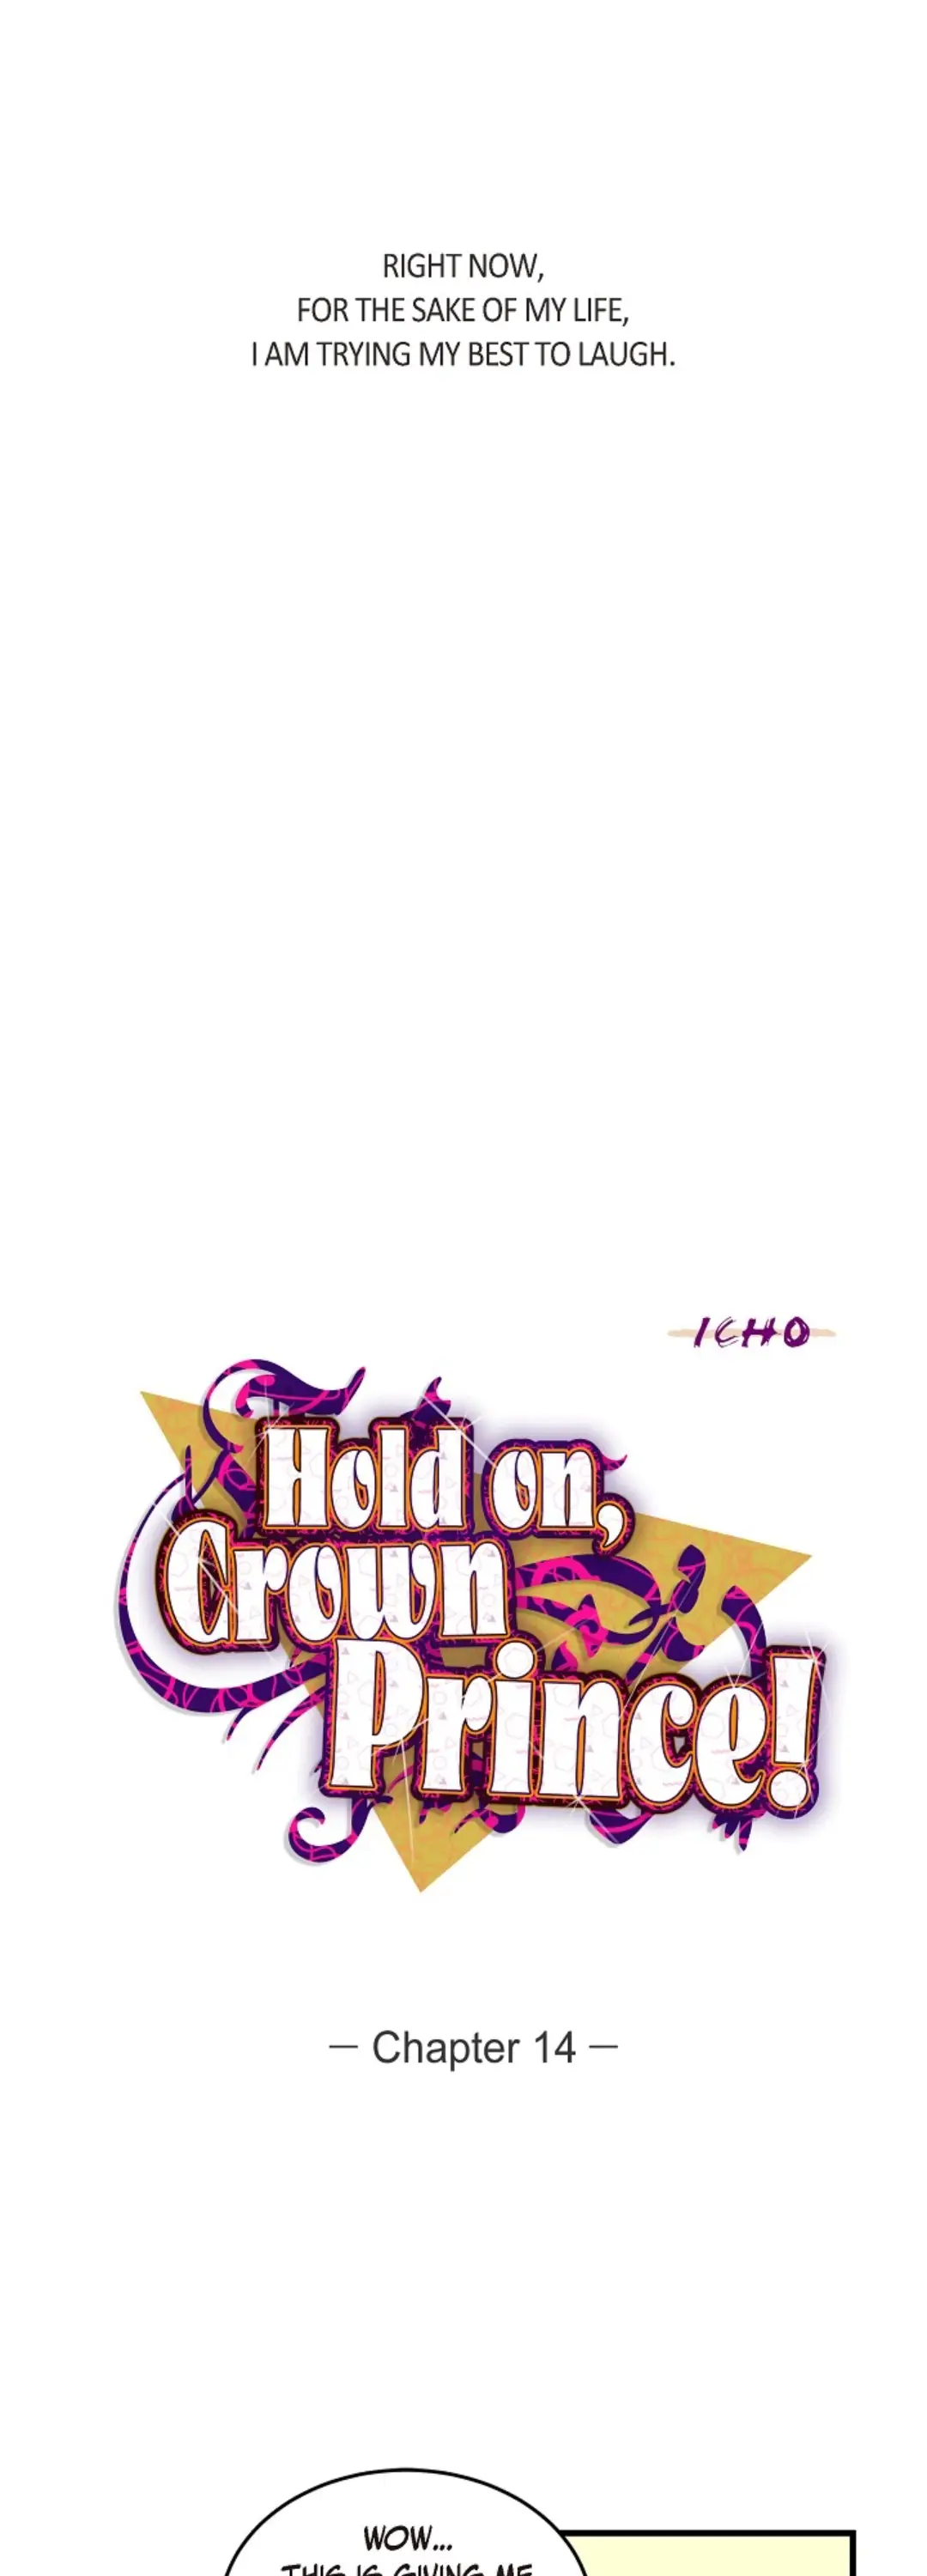 Hey, Prince! chapter 14